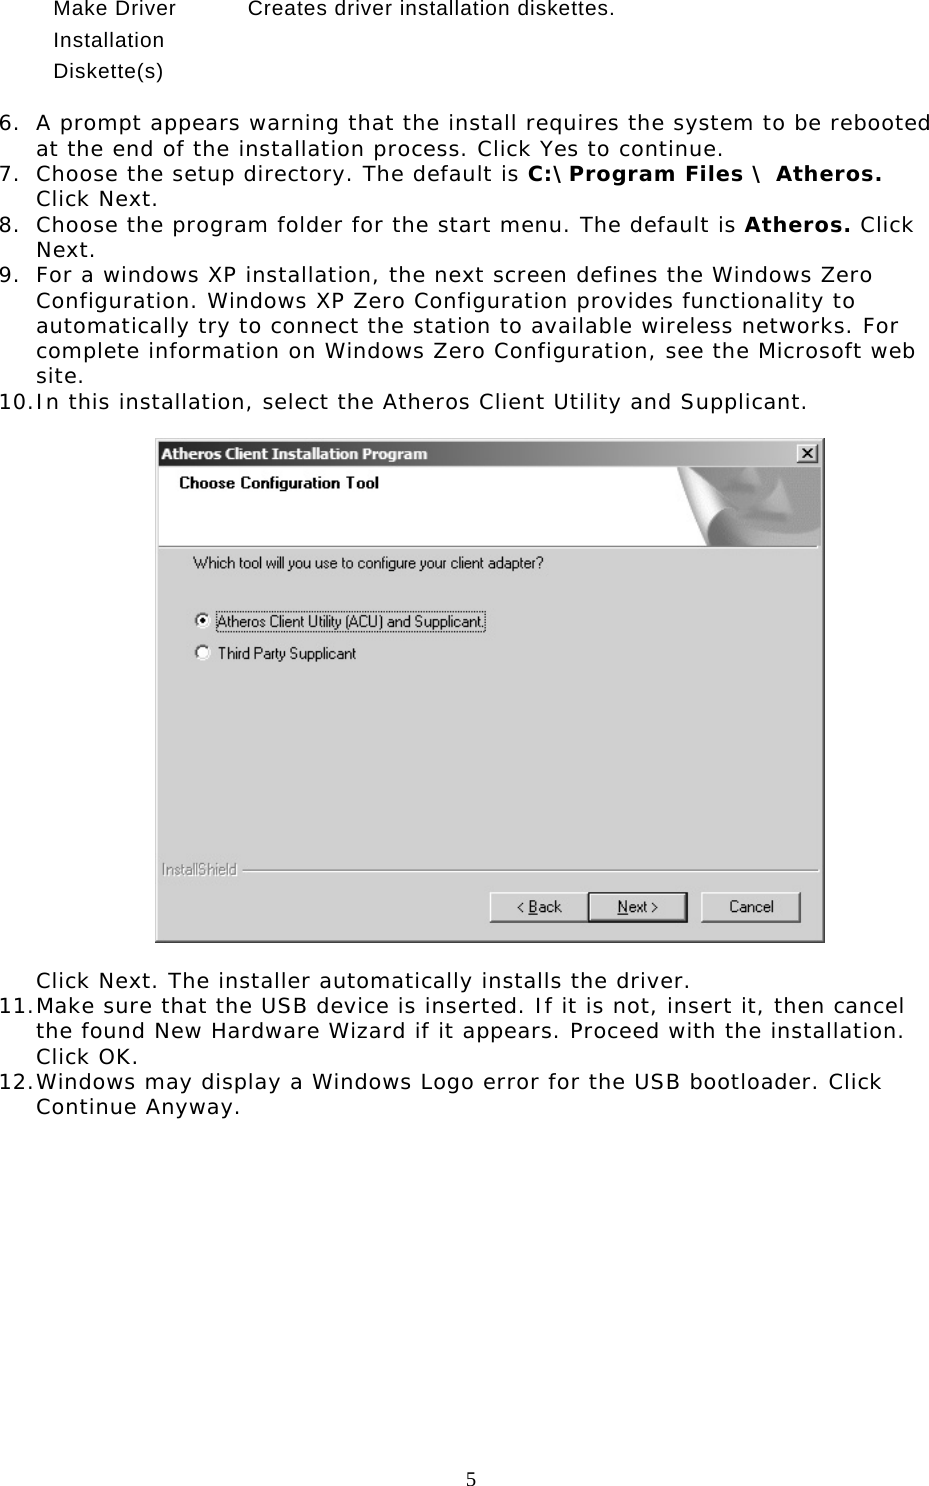  5   Make Driver Installation Diskette(s) Creates driver installation diskettes.  6.  A prompt appears warning that the install requires the system to be rebooted at the end of the installation process. Click Yes to continue. 7.  Choose the setup directory. The default is C:\Program Files \ Atheros. Click Next. 8.  Choose the program folder for the start menu. The default is Atheros. Click Next. 9.  For a windows XP installation, the next screen defines the Windows Zero Configuration. Windows XP Zero Configuration provides functionality to automatically try to connect the station to available wireless networks. For complete information on Windows Zero Configuration, see the Microsoft web site. 10. In this installation, select the Atheros Client Utility and Supplicant.    Click Next. The installer automatically installs the driver. 11. Make sure that the USB device is inserted. If it is not, insert it, then cancel the found New Hardware Wizard if it appears. Proceed with the installation. Click OK. 12. Windows may display a Windows Logo error for the USB bootloader. Click Continue Anyway.  